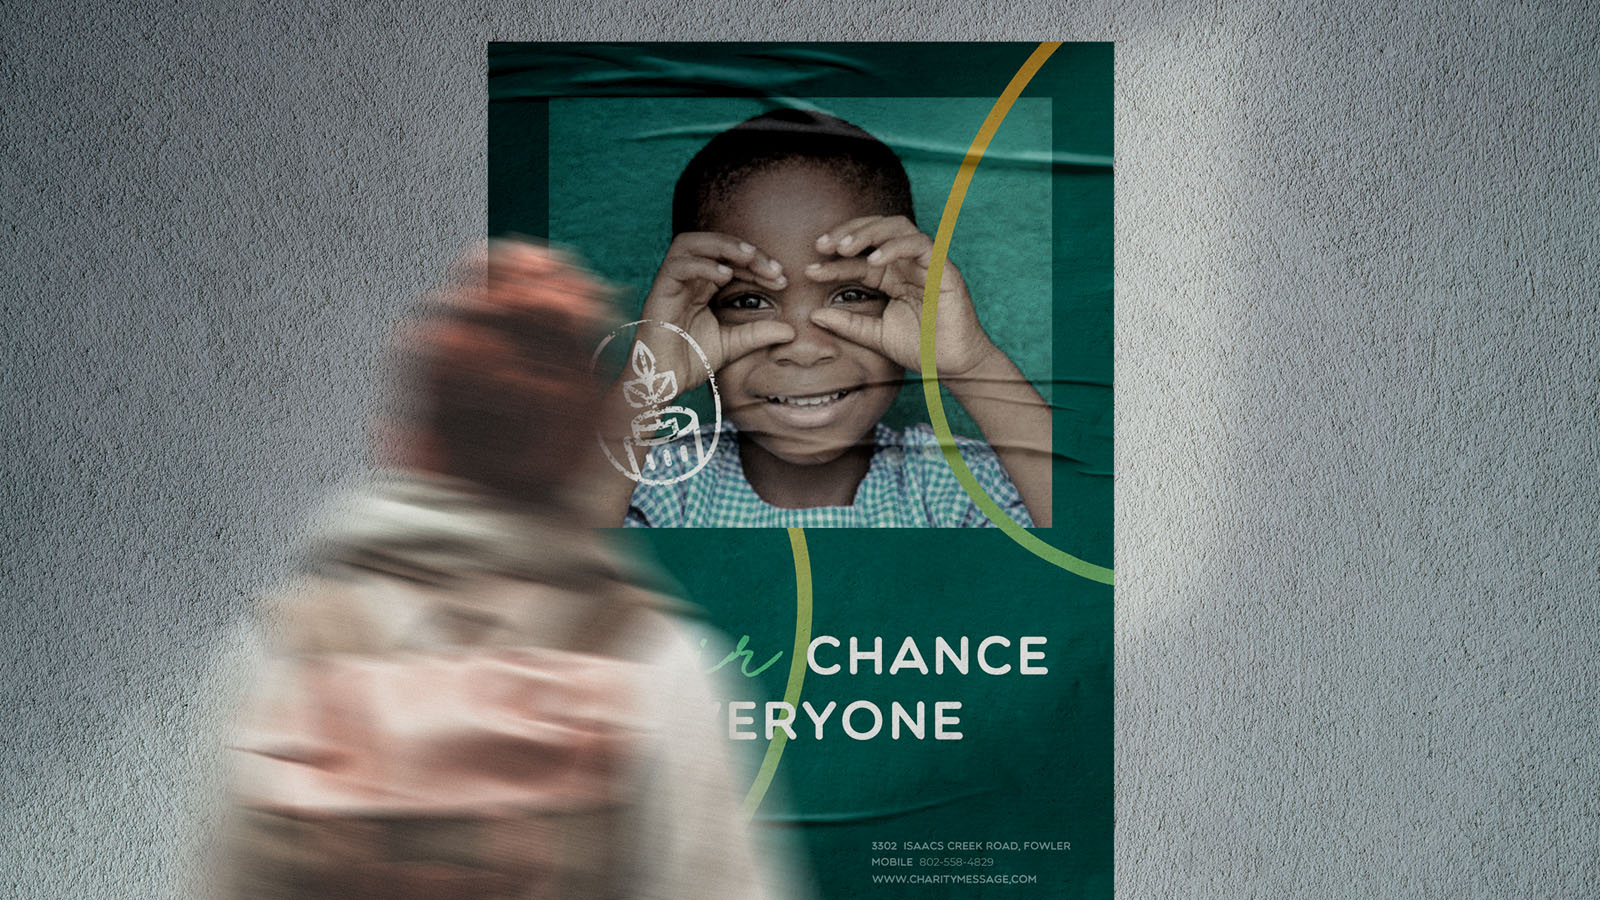 A Fair Chance To Everyone – Charity Message Branding By Abdelshafi